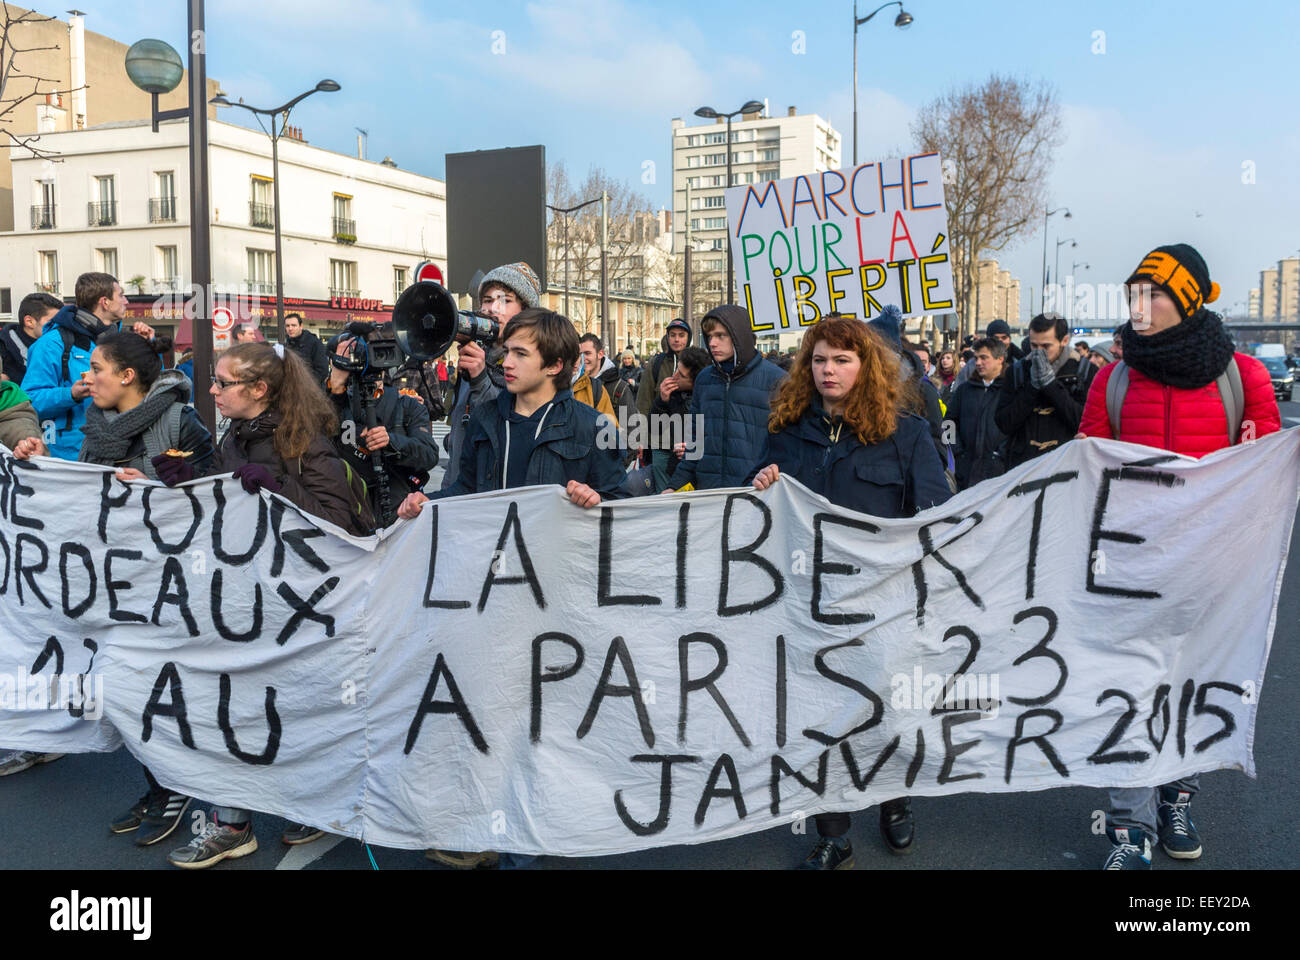 Paris, France. French High Scho-ol Students March from Bordeaux in Support of "Charlie Hebdo" Shooting Attack, Crowd Teenagers Holding Protest Banners, teens protest for justice Stock Photo